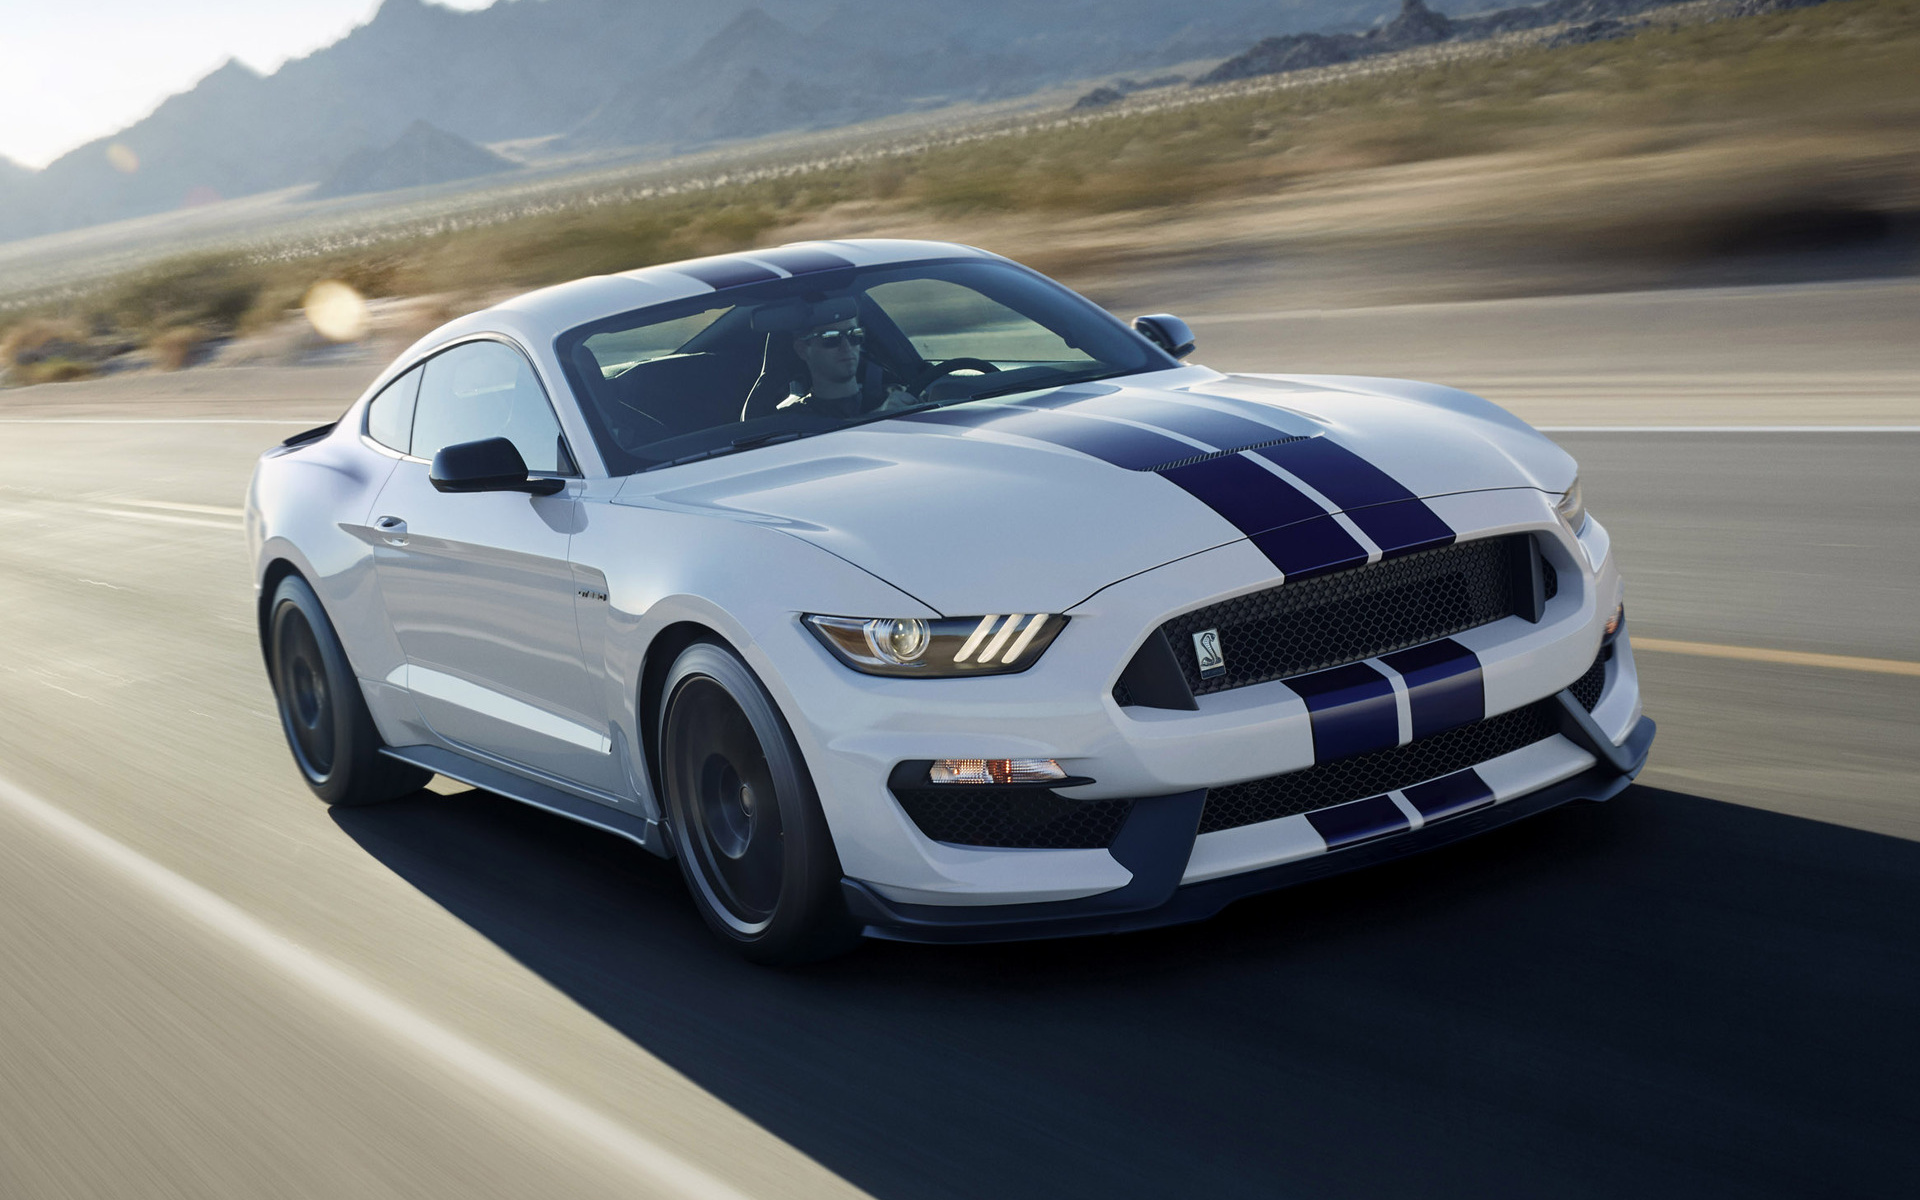 Shelby Gt350 - Ford Mustang Shelby 5.0 , HD Wallpaper & Backgrounds